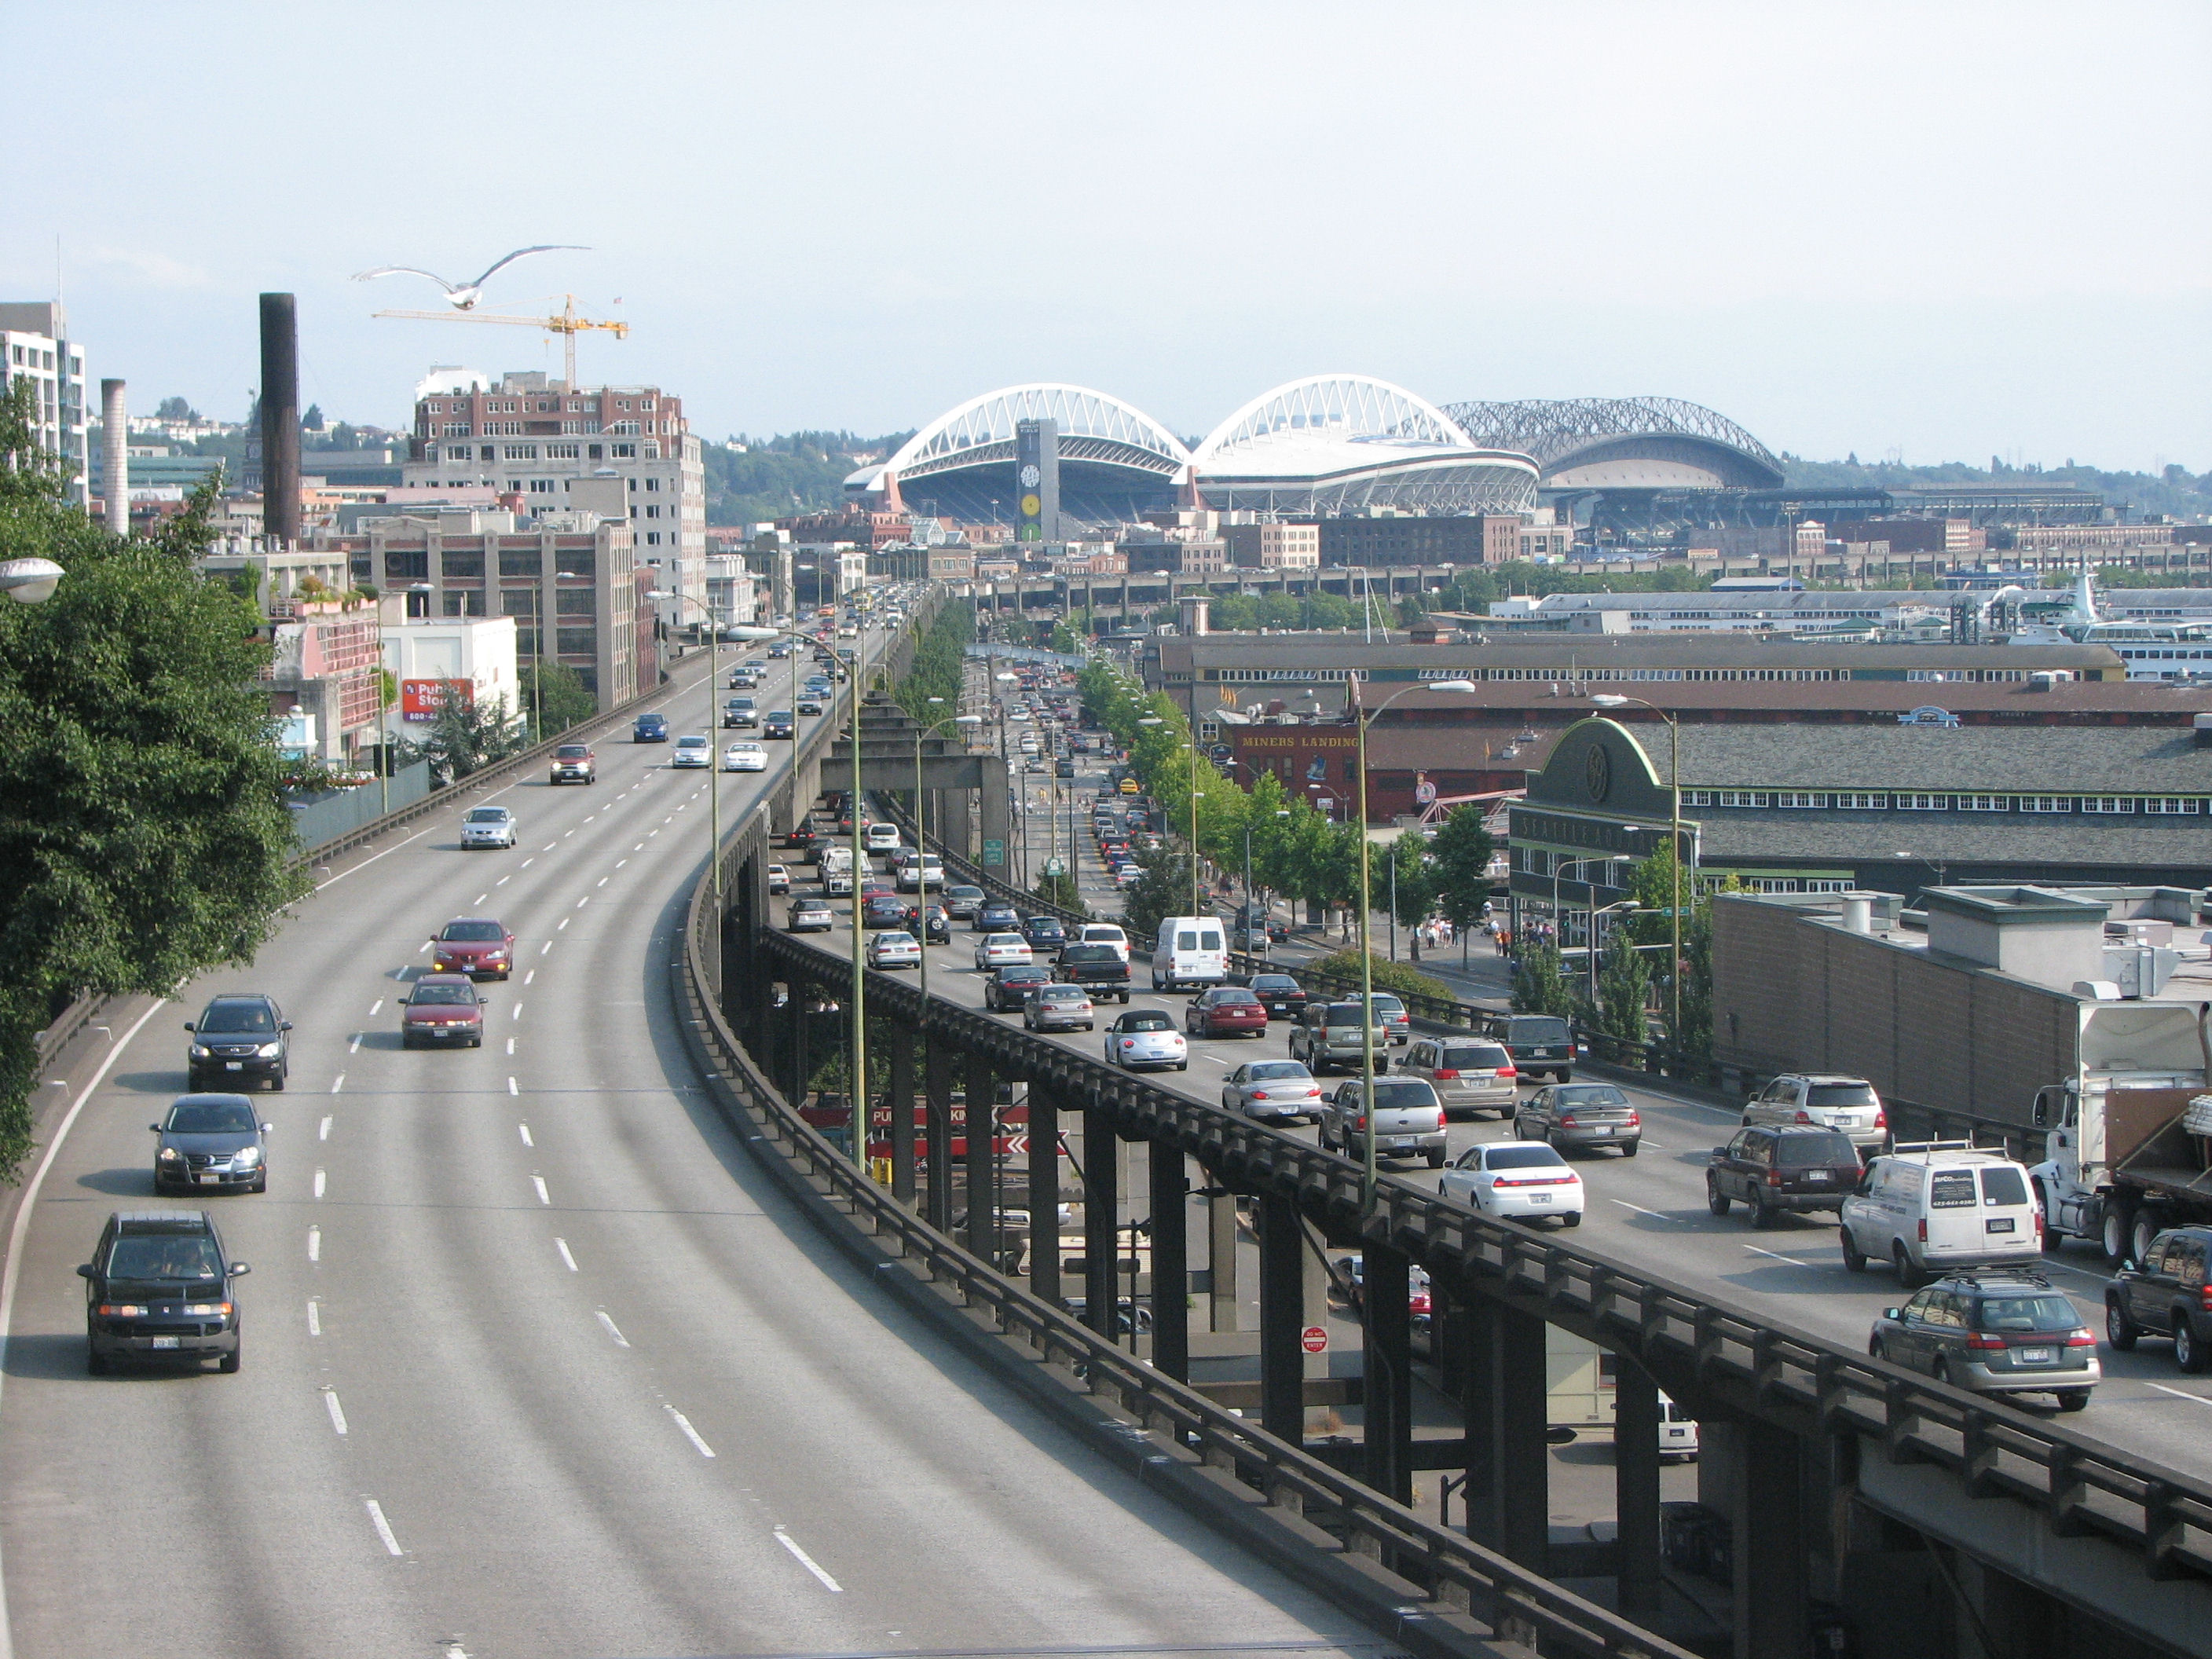 The Alaskan Way Viaduct, damaged decades ago, will be rebuilt as a double-decker highway, even though a transit-heavy alternative would have been at least as effective at reducing congestion. Photo: Rootology/##http://en.wikipedia.org/wiki/Alaskan_Way_Viaduct#mediaviewer/File:The_Alaskan_Way_Viaduct.jpg##Wikimedia##